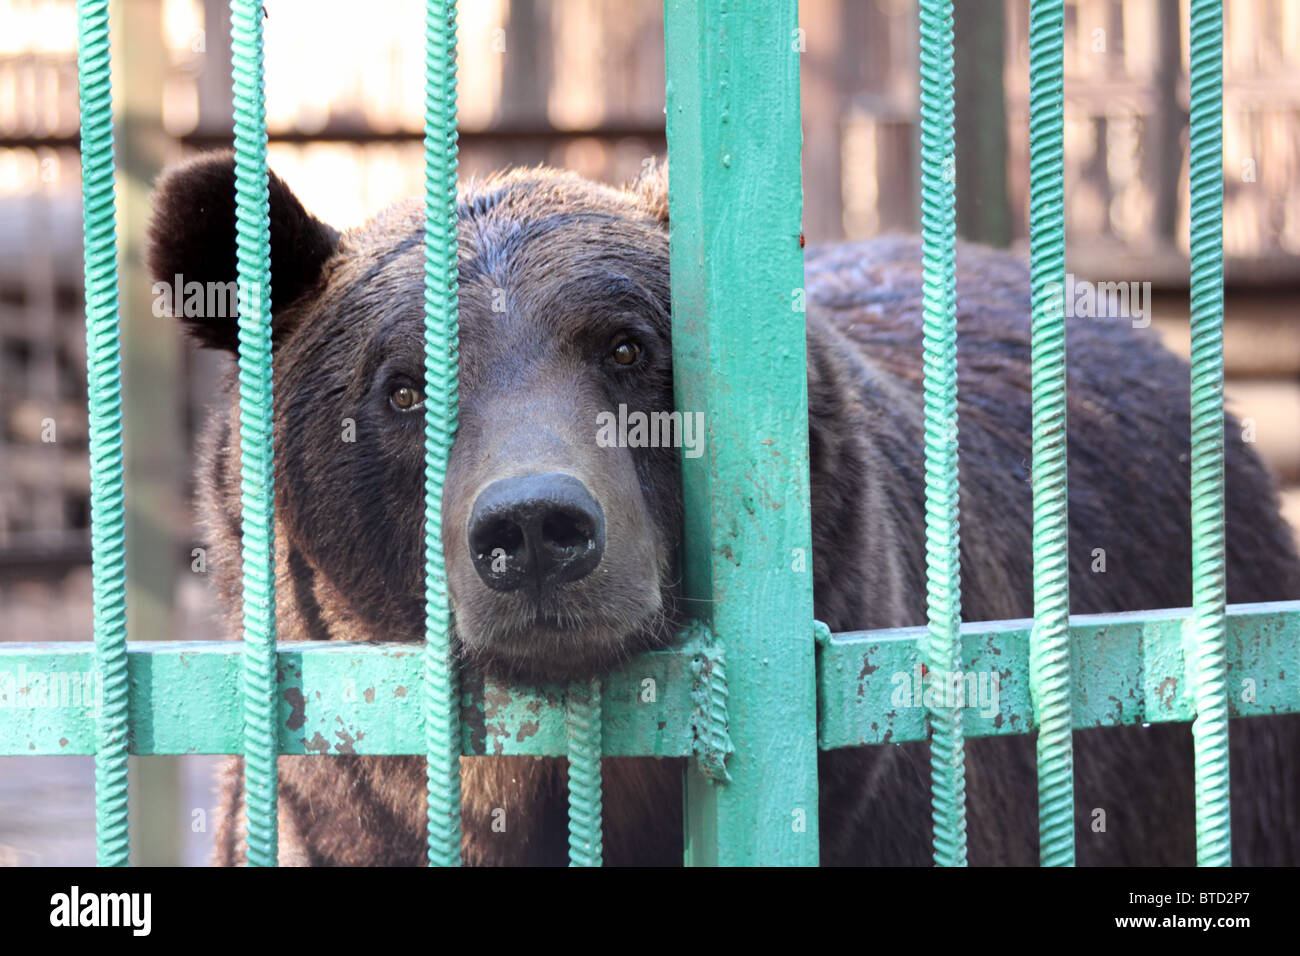 big brown bear closed in zoo cage Stock Photo